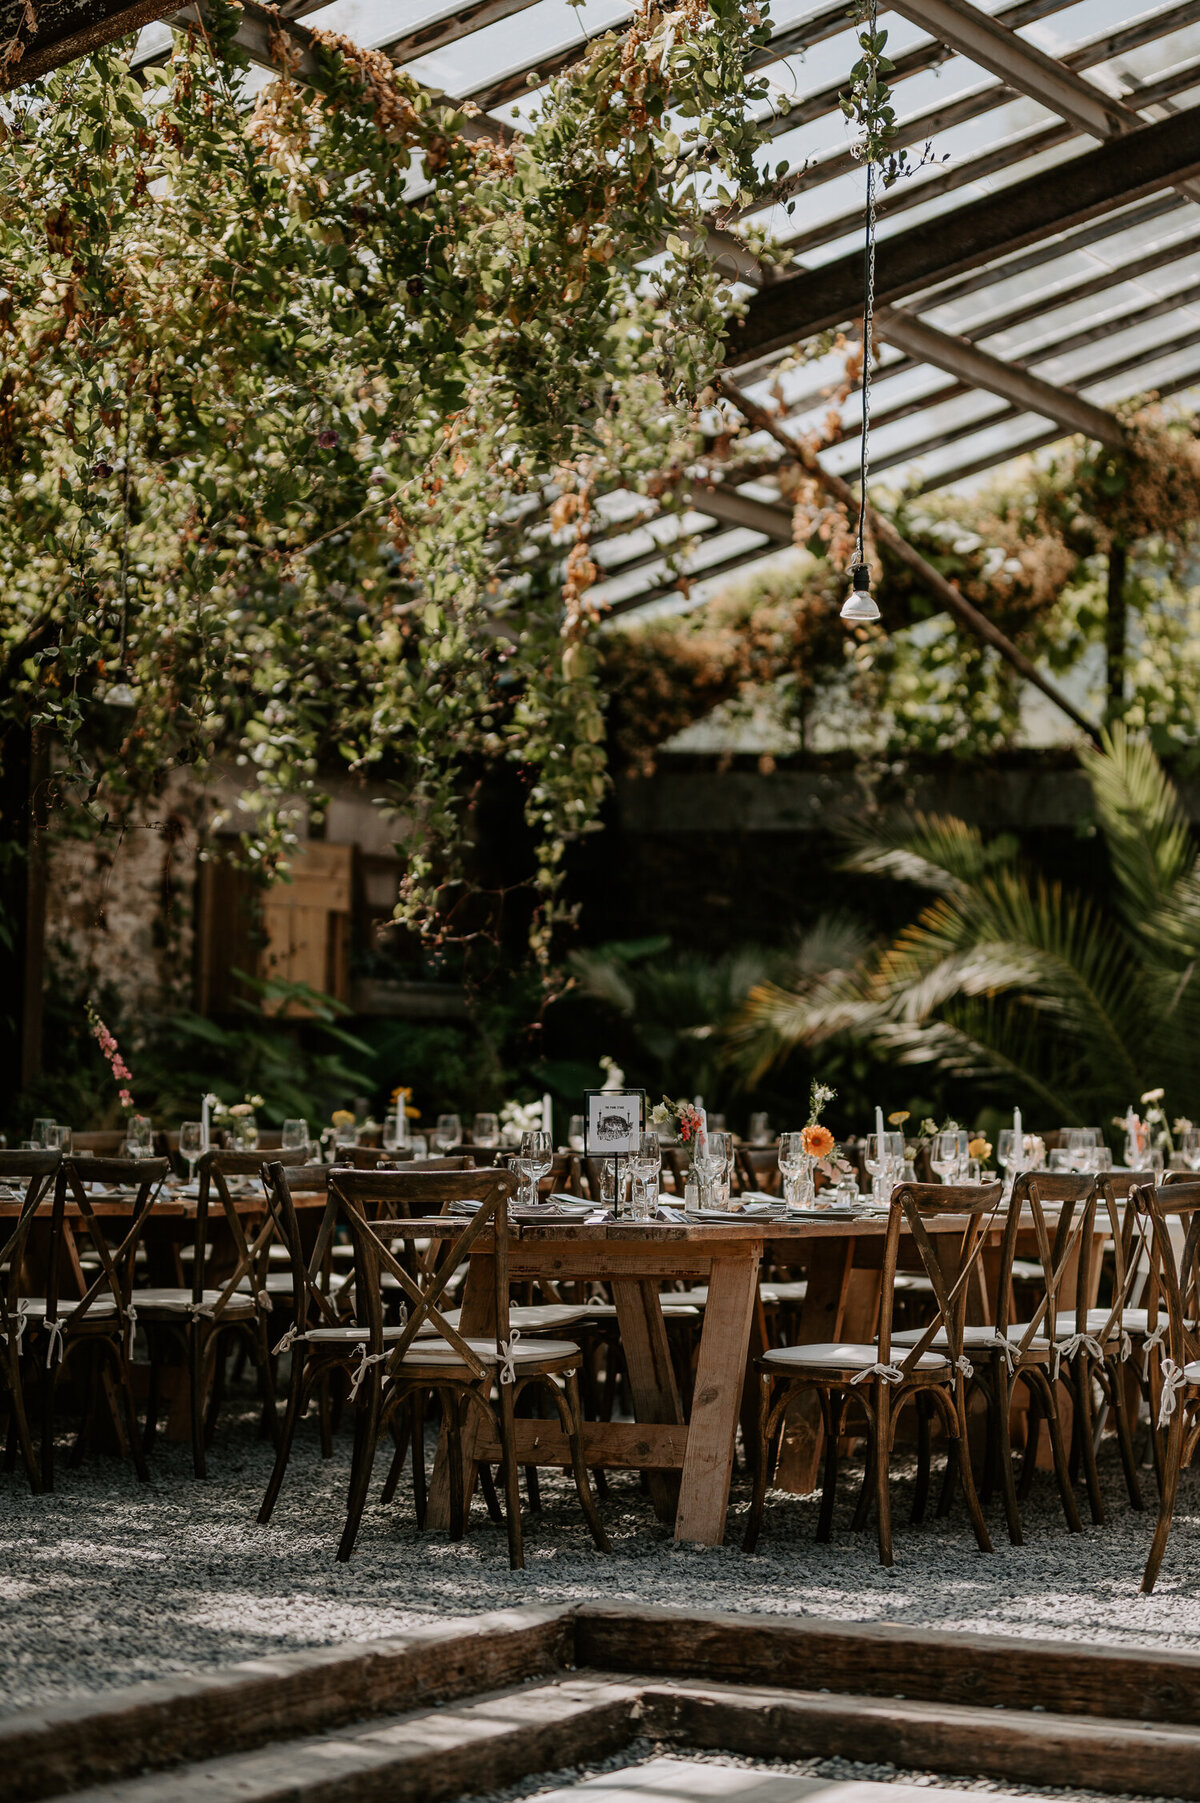 Trestle tables are lined up in the greenhouse at Anran at Tidwell Farm, lots of plants are surrounding the venue that has a real Italian wedding venue vibe.